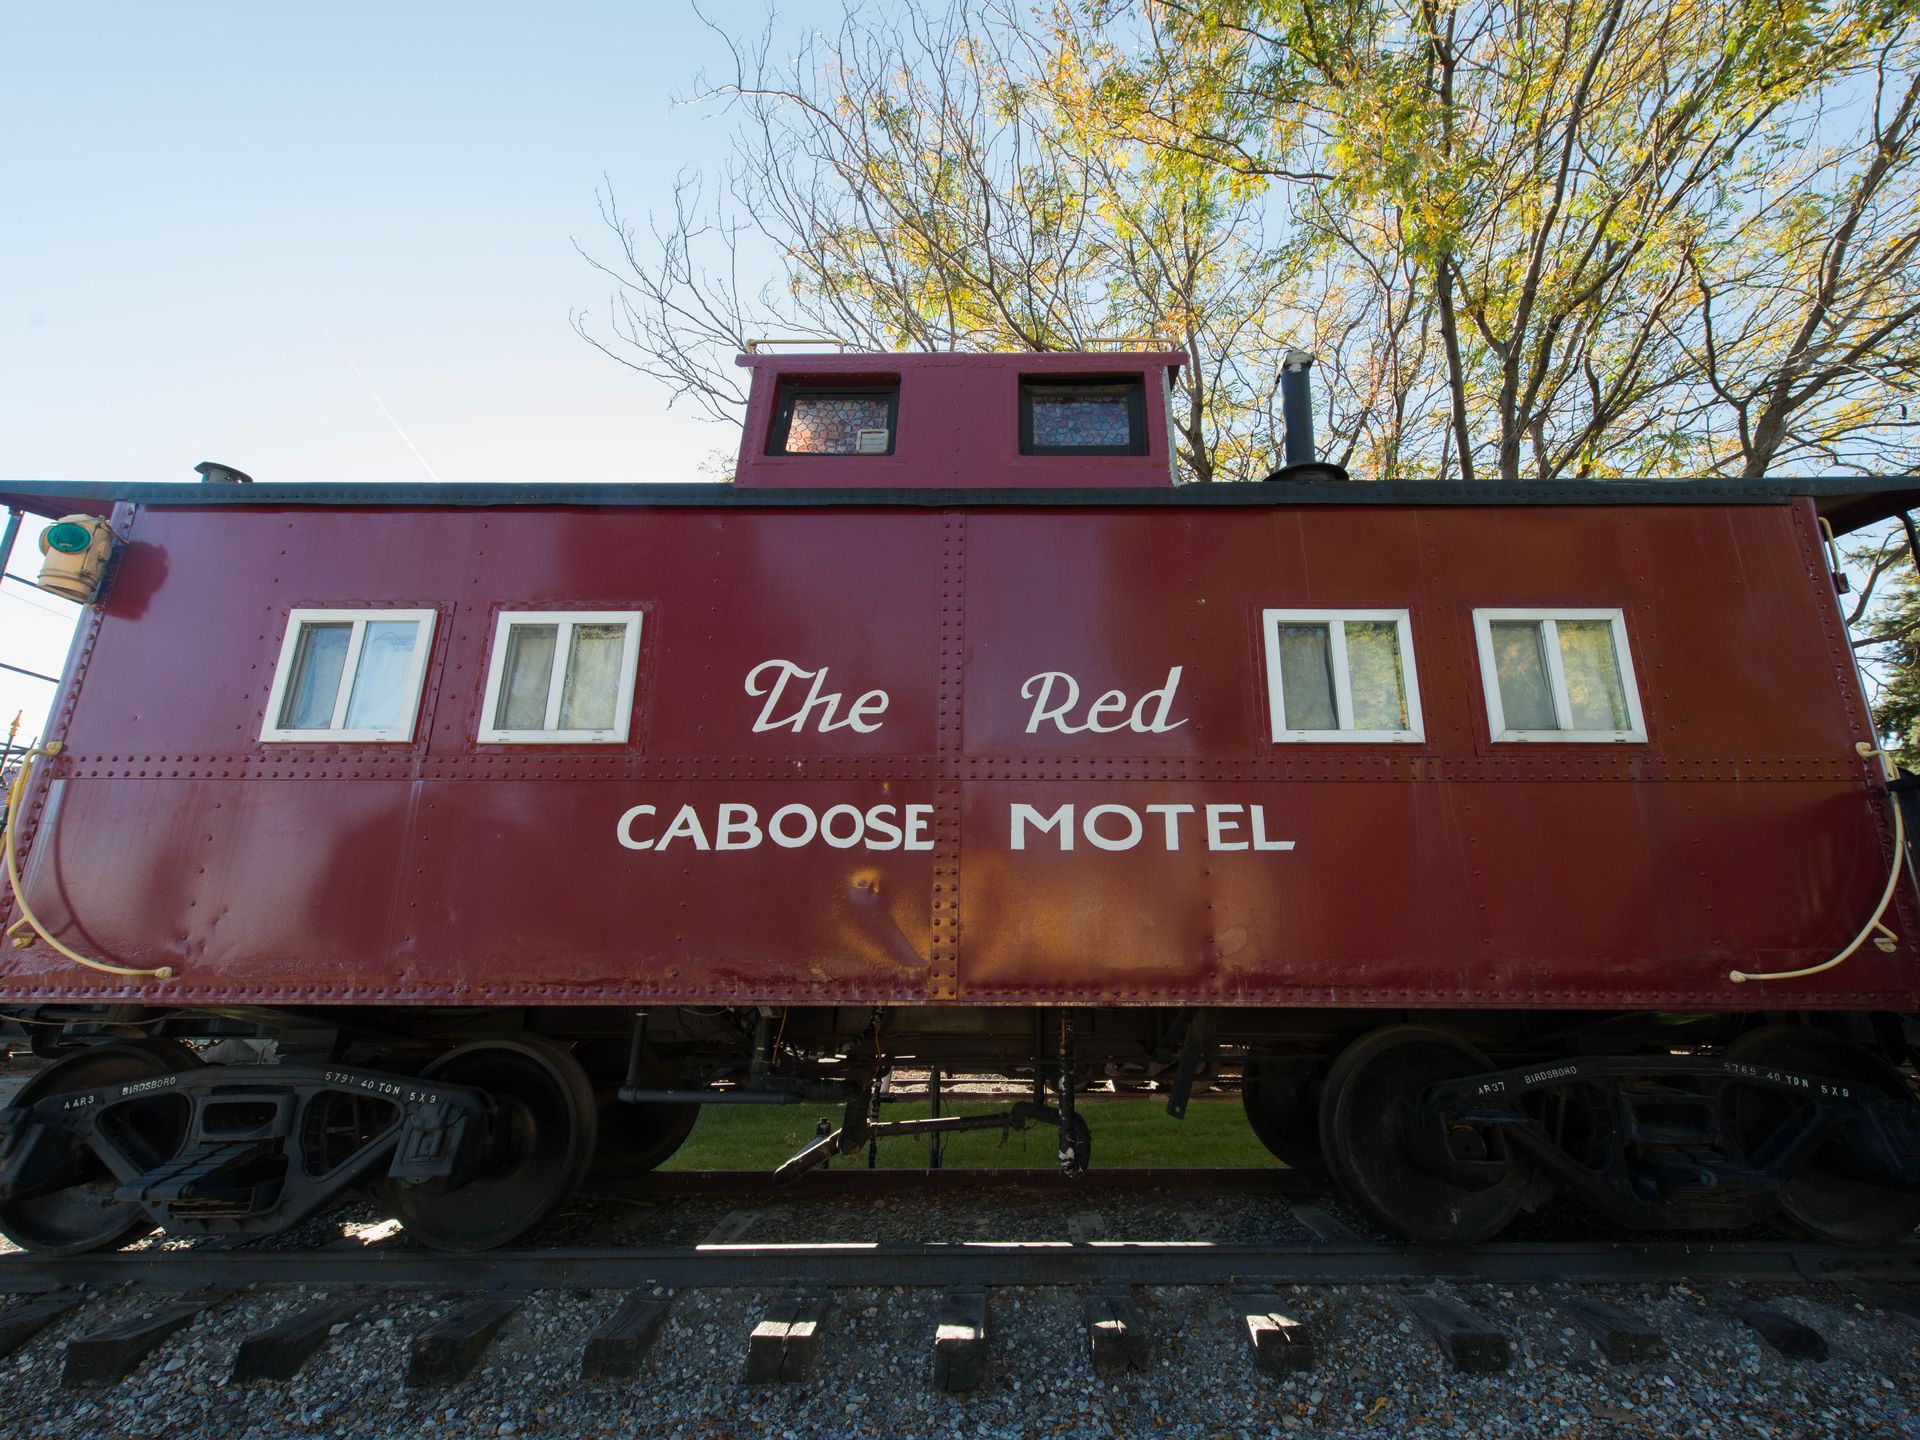 red train caboose featuring big sign for Red Caboose Motel